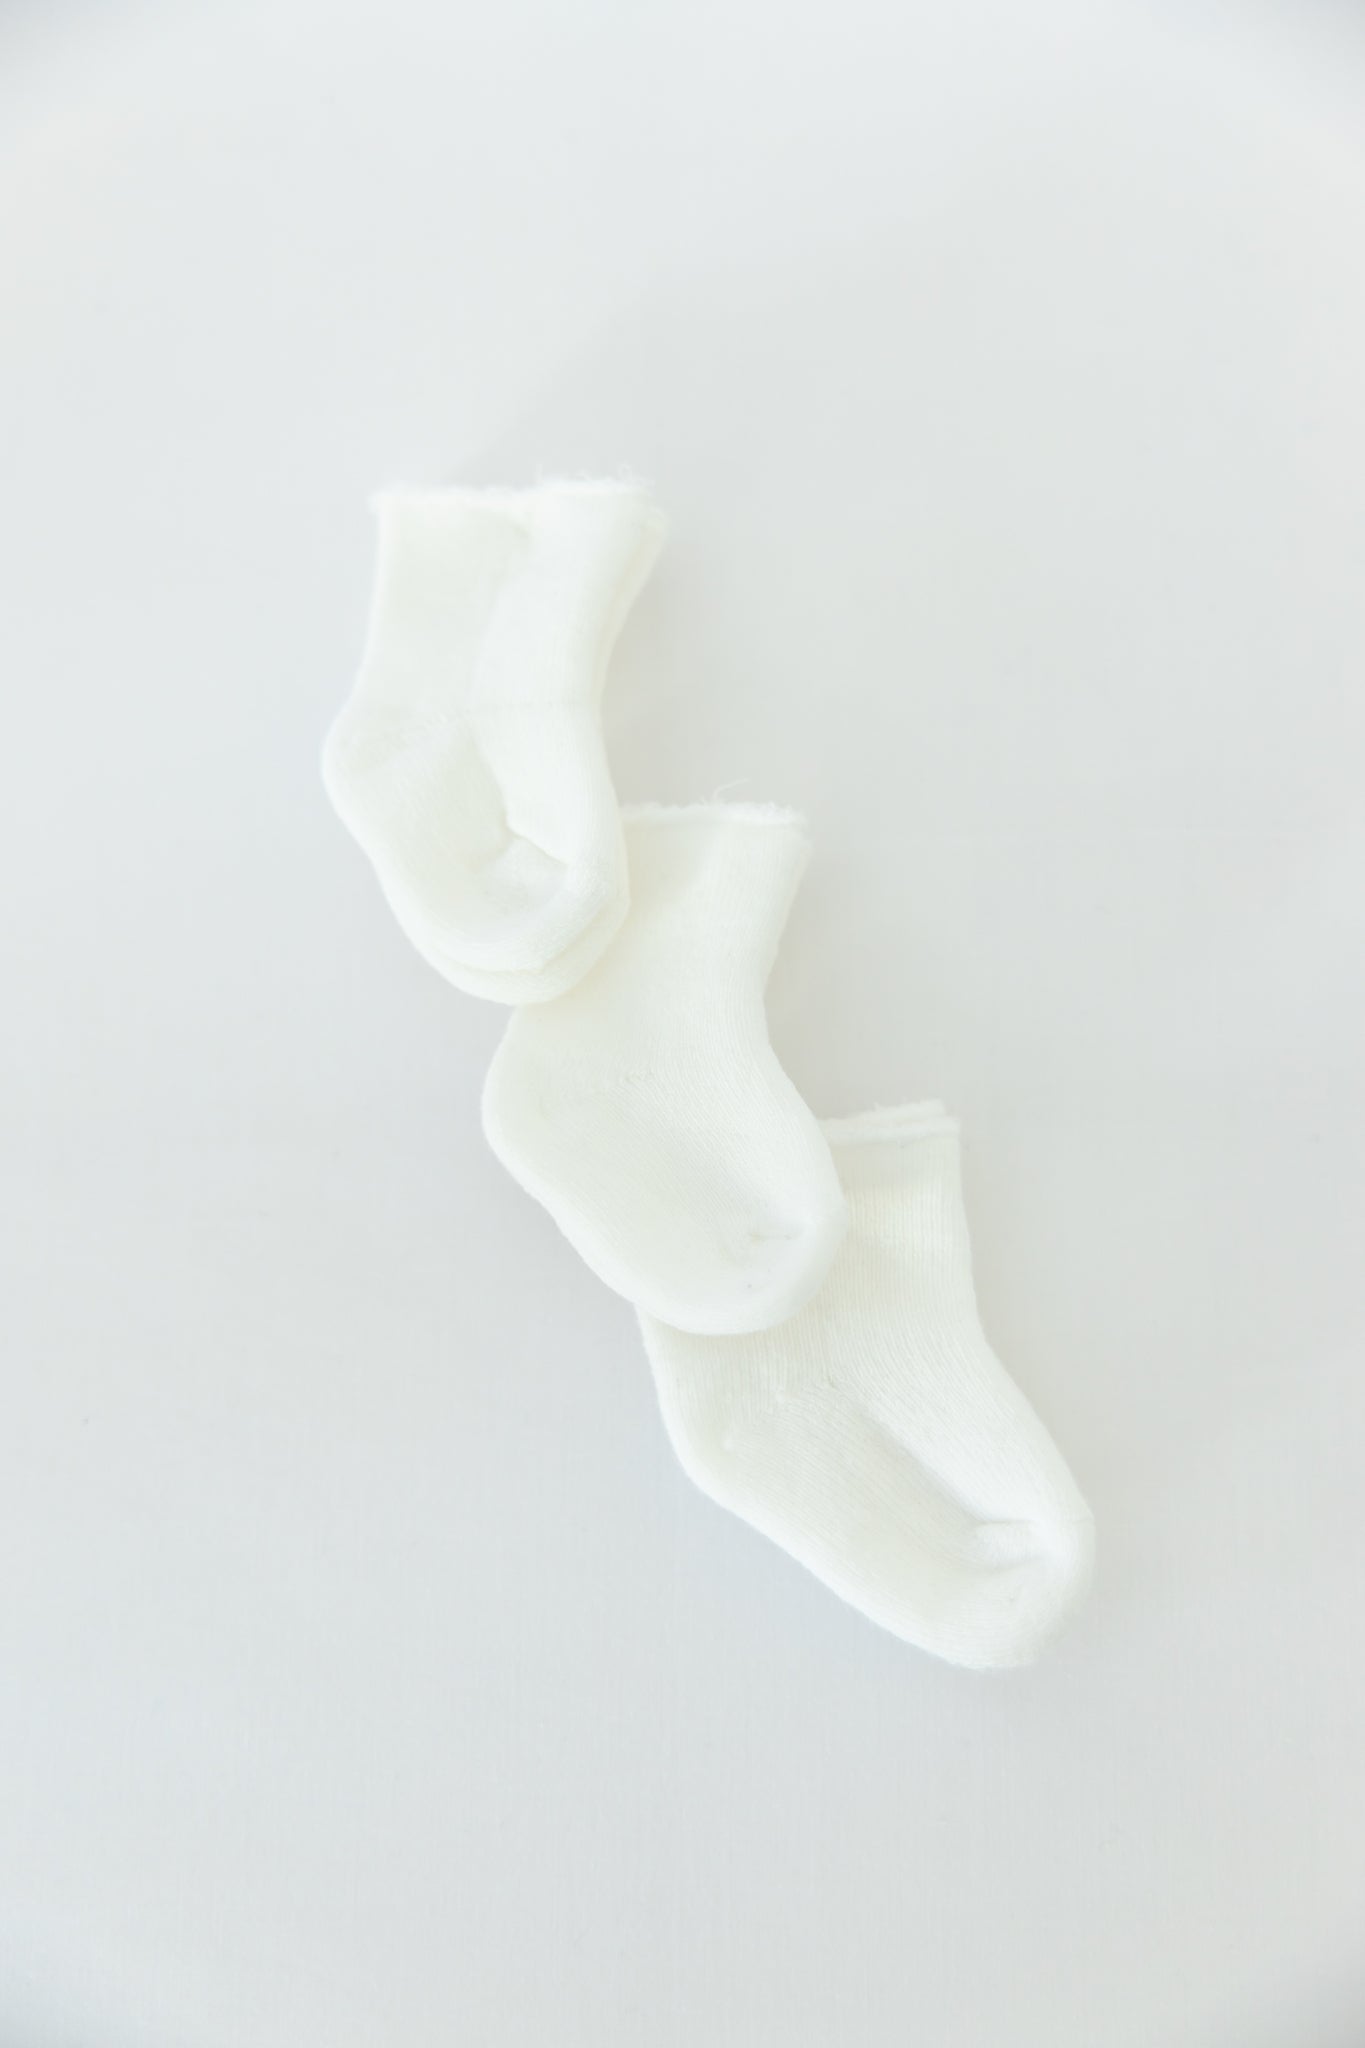 Certified Organic Knitted Baby Socks- Pack of 3 White Pairs